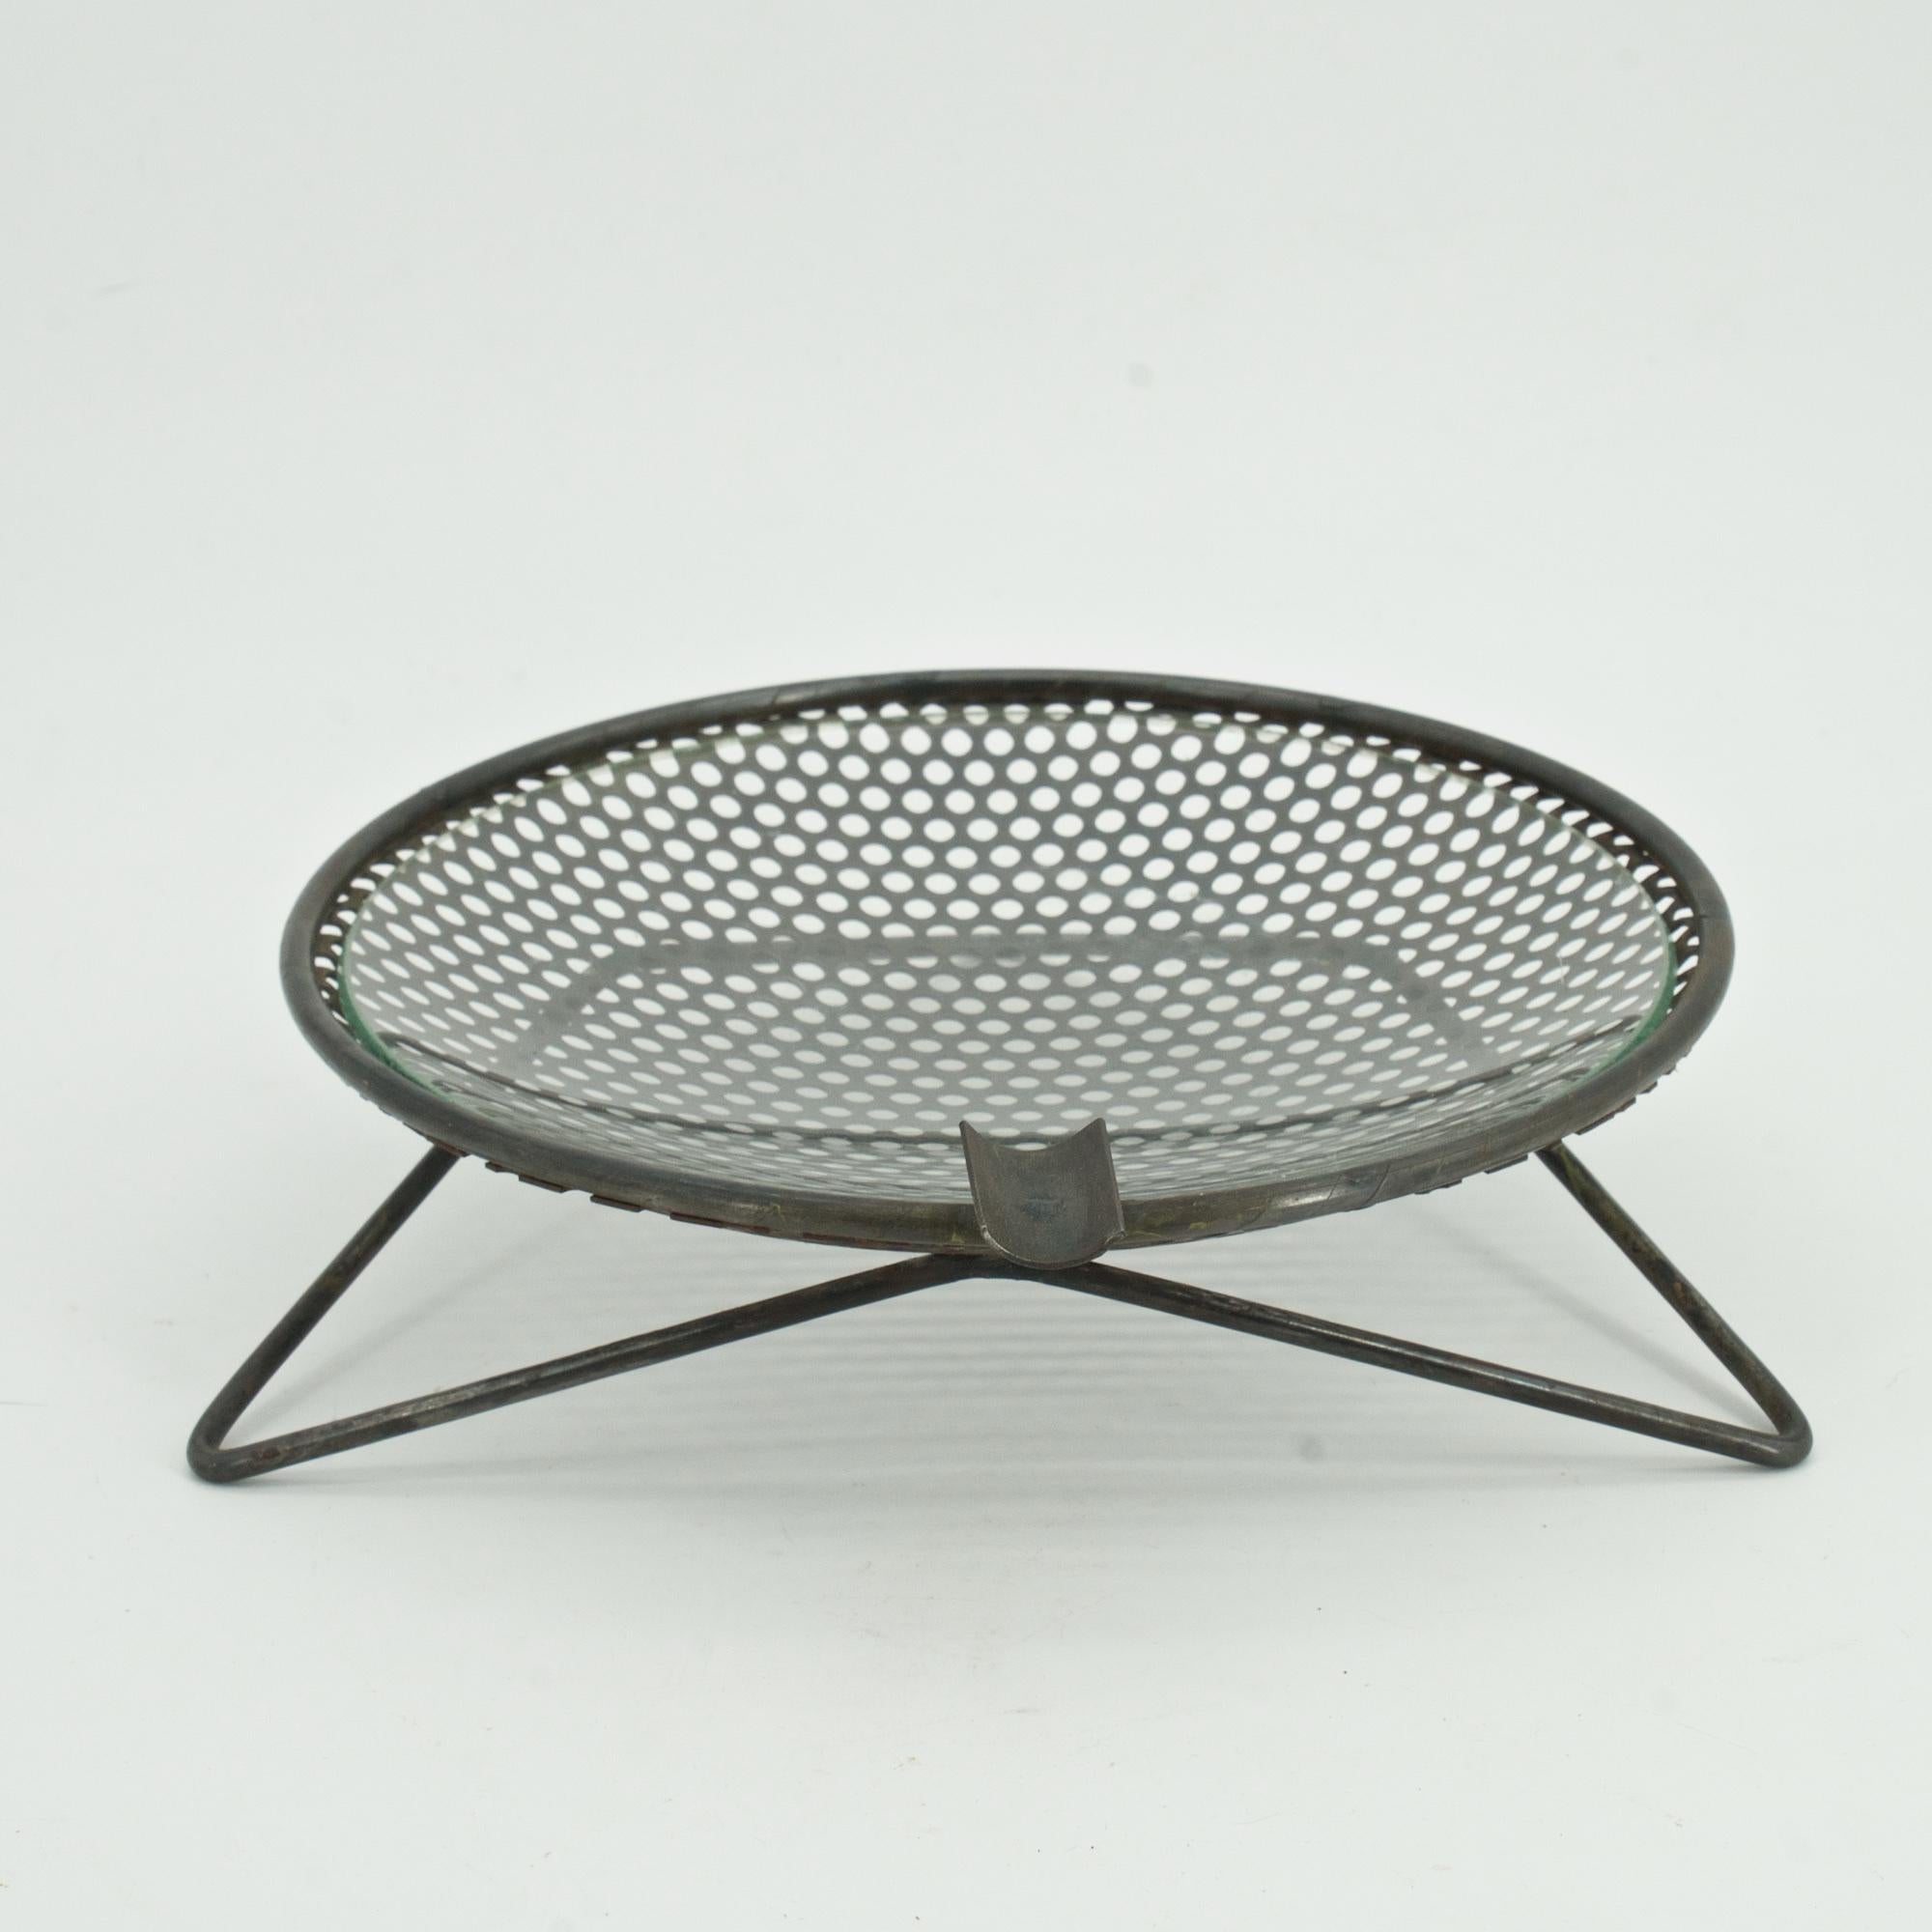 Mid-Century Modern 1950s Perforated Metal Atomic Dish Ashtray Nº S30 by Richard Galef Ravenware For Sale